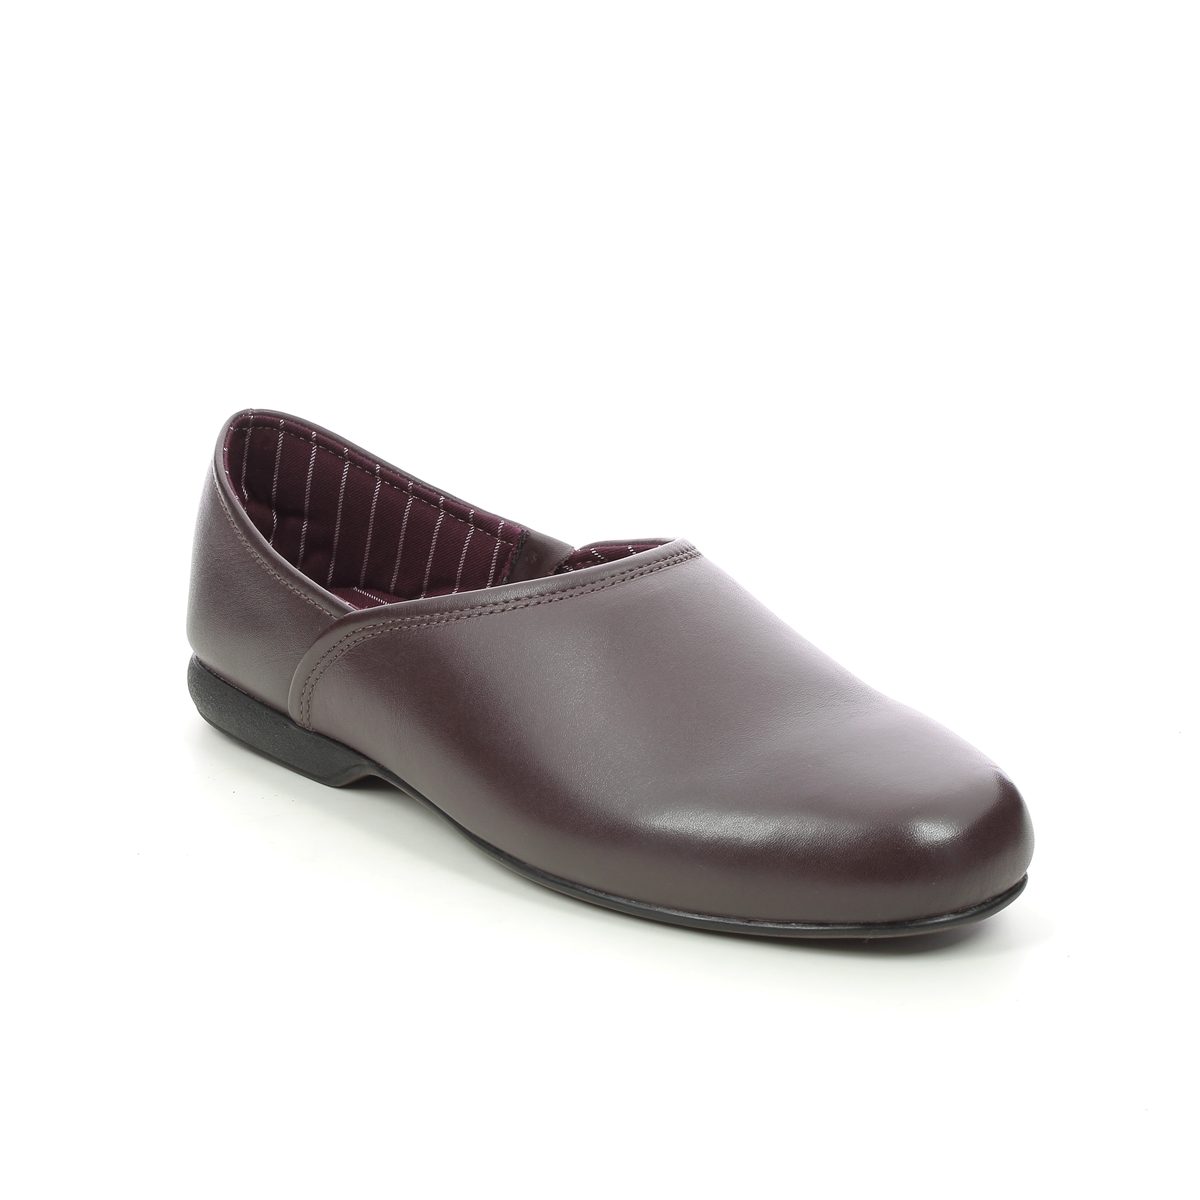 Clarks Harston Elite Burgundy Leather Mens Slippers 447217G In Size 10 In Plain Burgundy Leather G Width Fitting